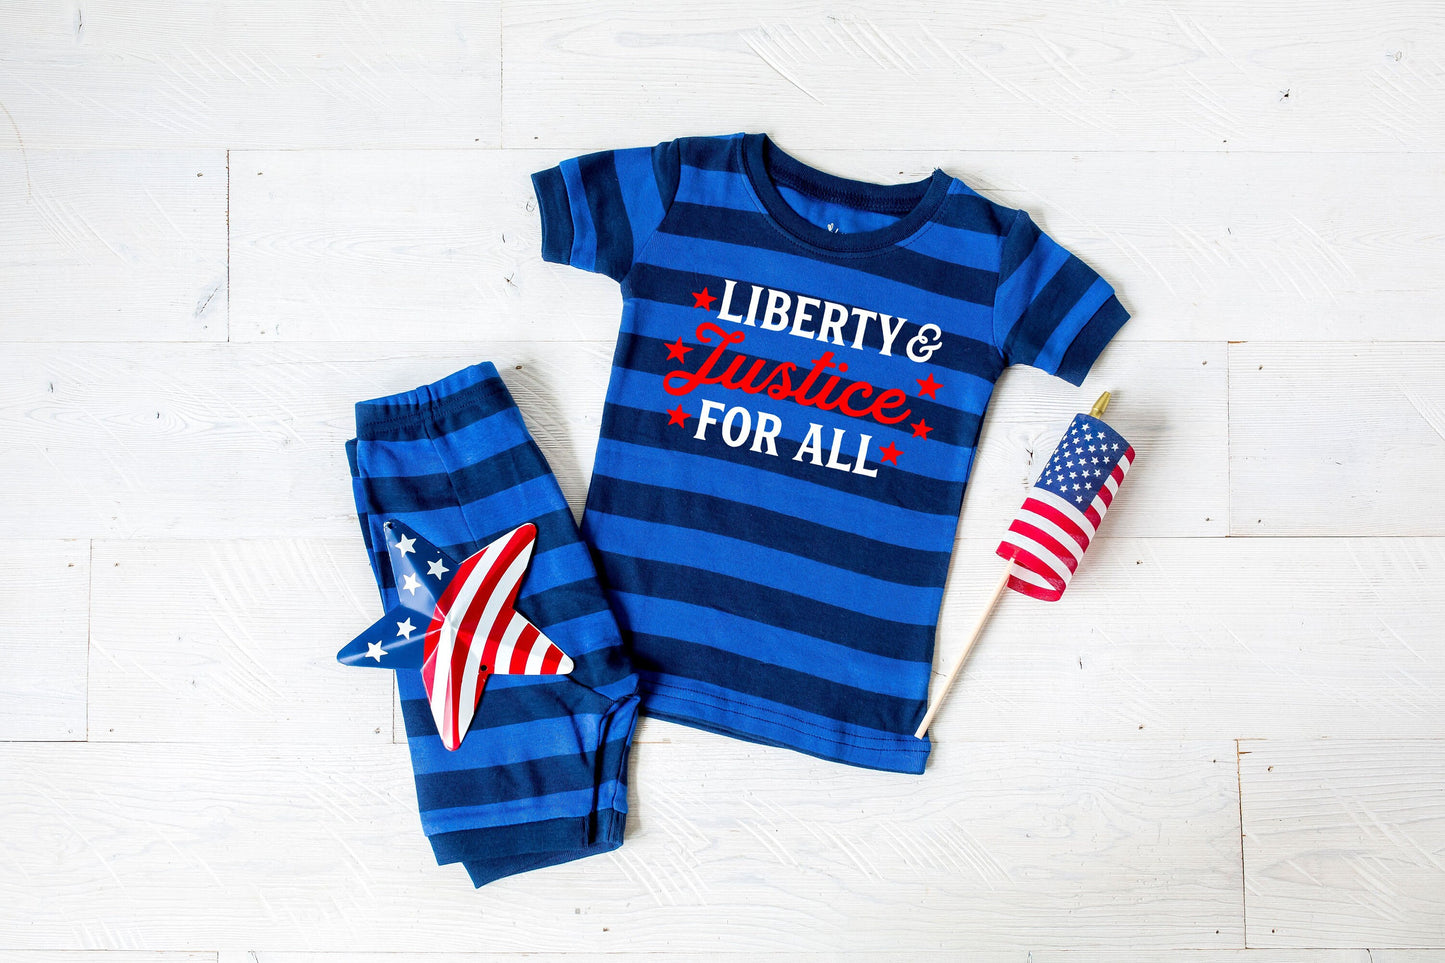 Liberty and Justice for All Blue Striped Shorts Toddler and Kids Pajamas - Kids 4th of July Pajamas - 4th of July Toddler Pajamas Set